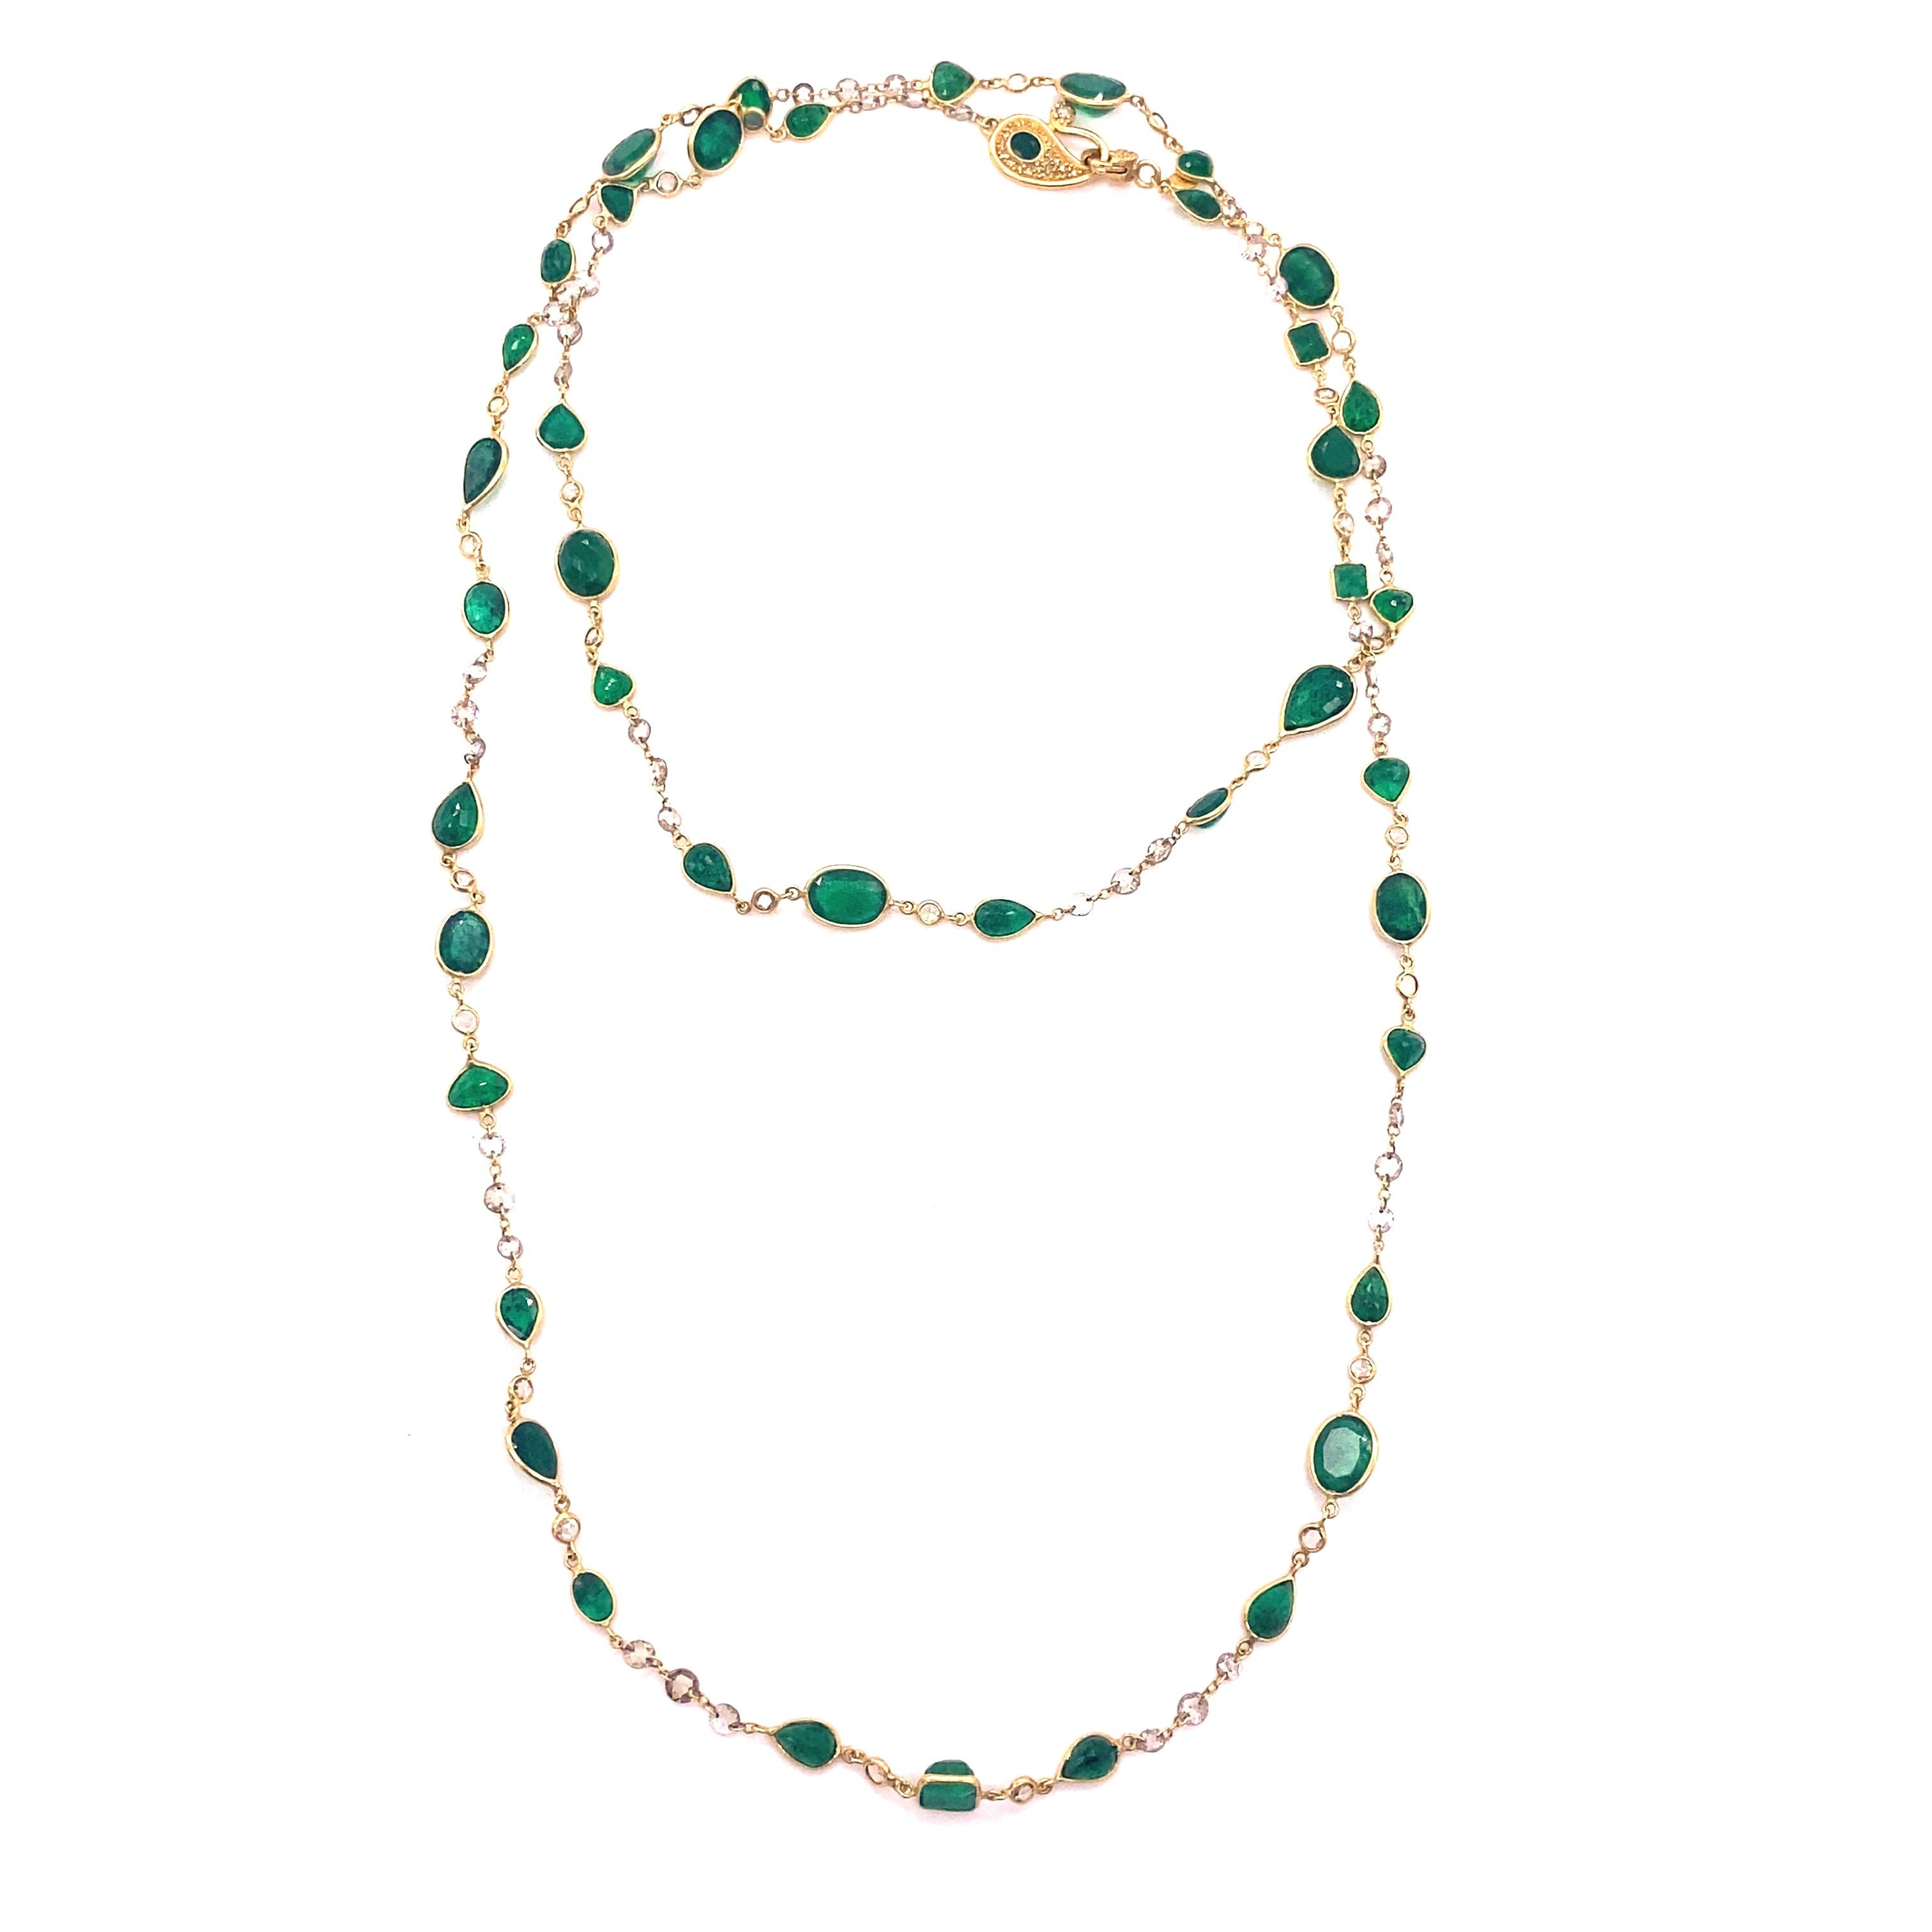 20 Karat Yellow Gold Emerald and Rose-Cut Diamonds Necklace with 32.47 Carat Emeralds and 6.02 Carat Diamonds. This Necklace Comes With A Small Clasp And Measures 36 Inches In Length.